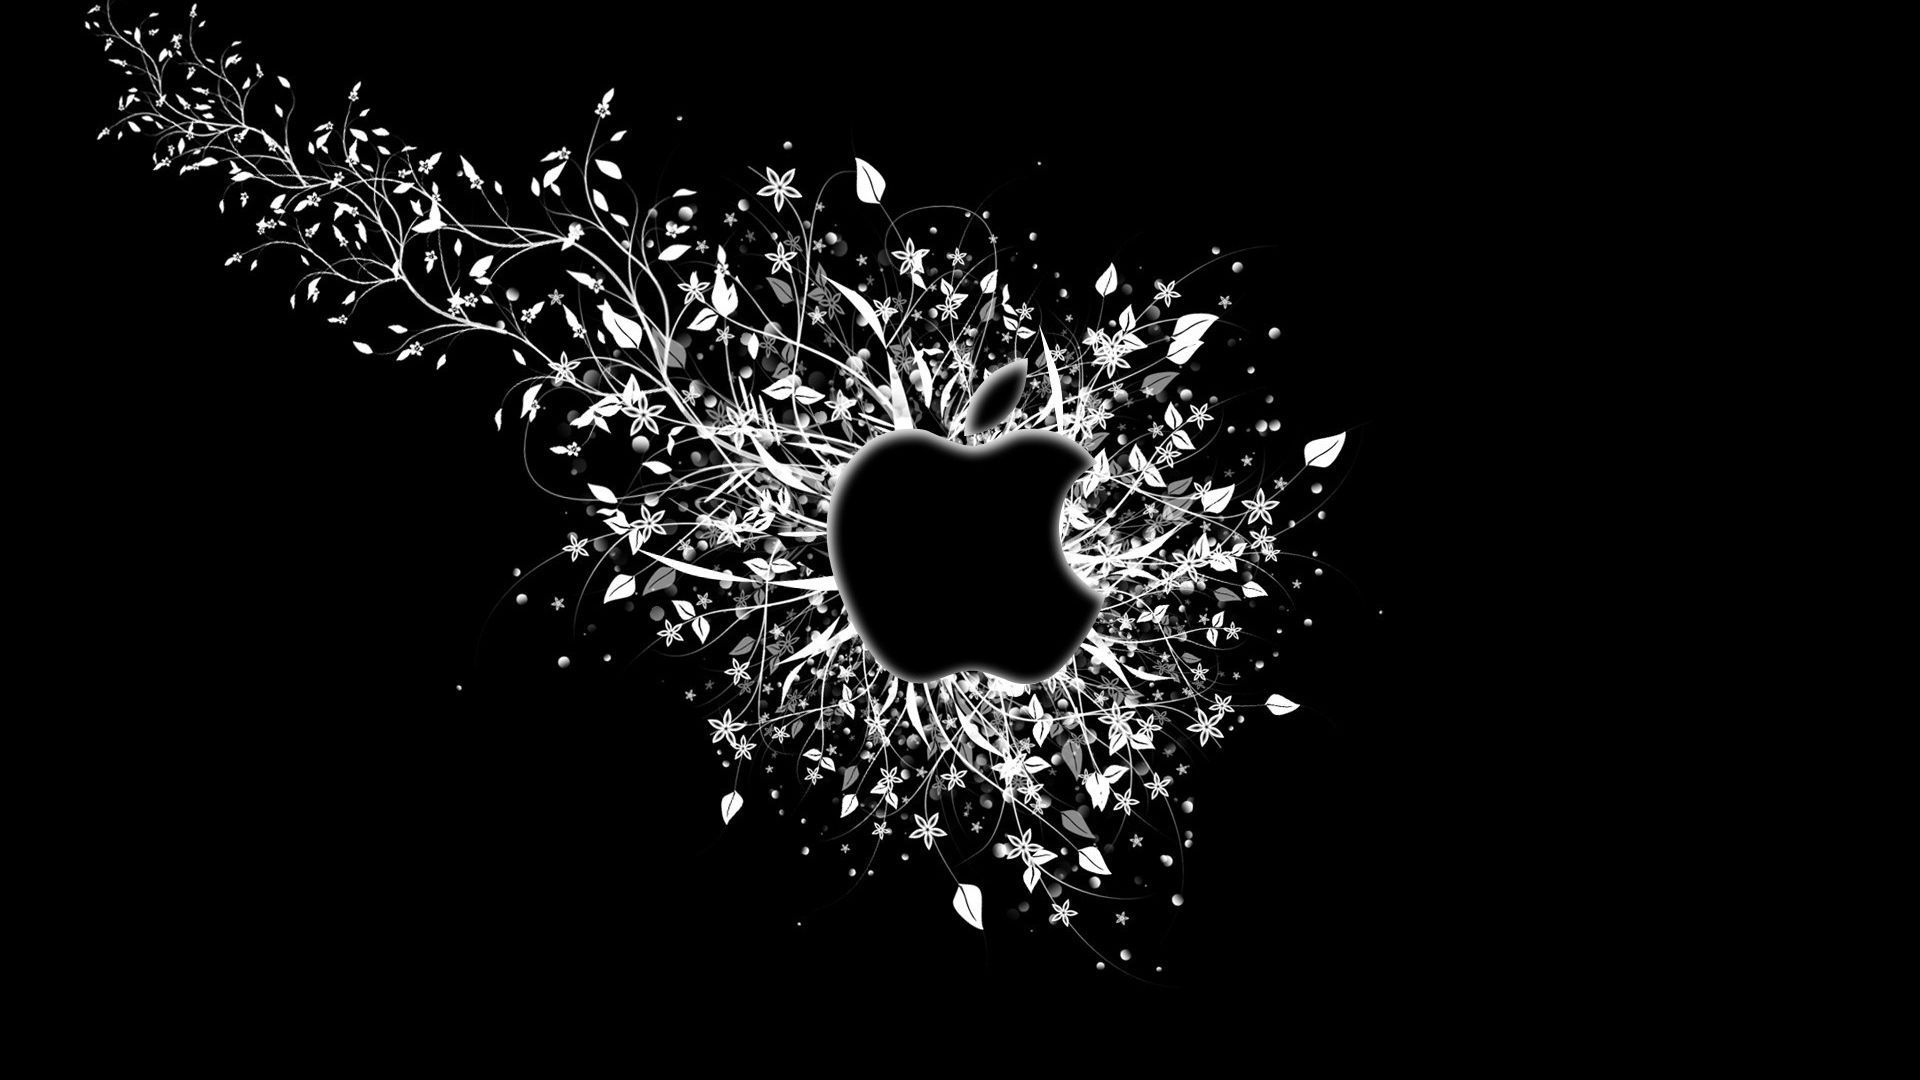 Download Wallpaper 1920x1080 Apple, Mac, Paint, Stains, Splashes